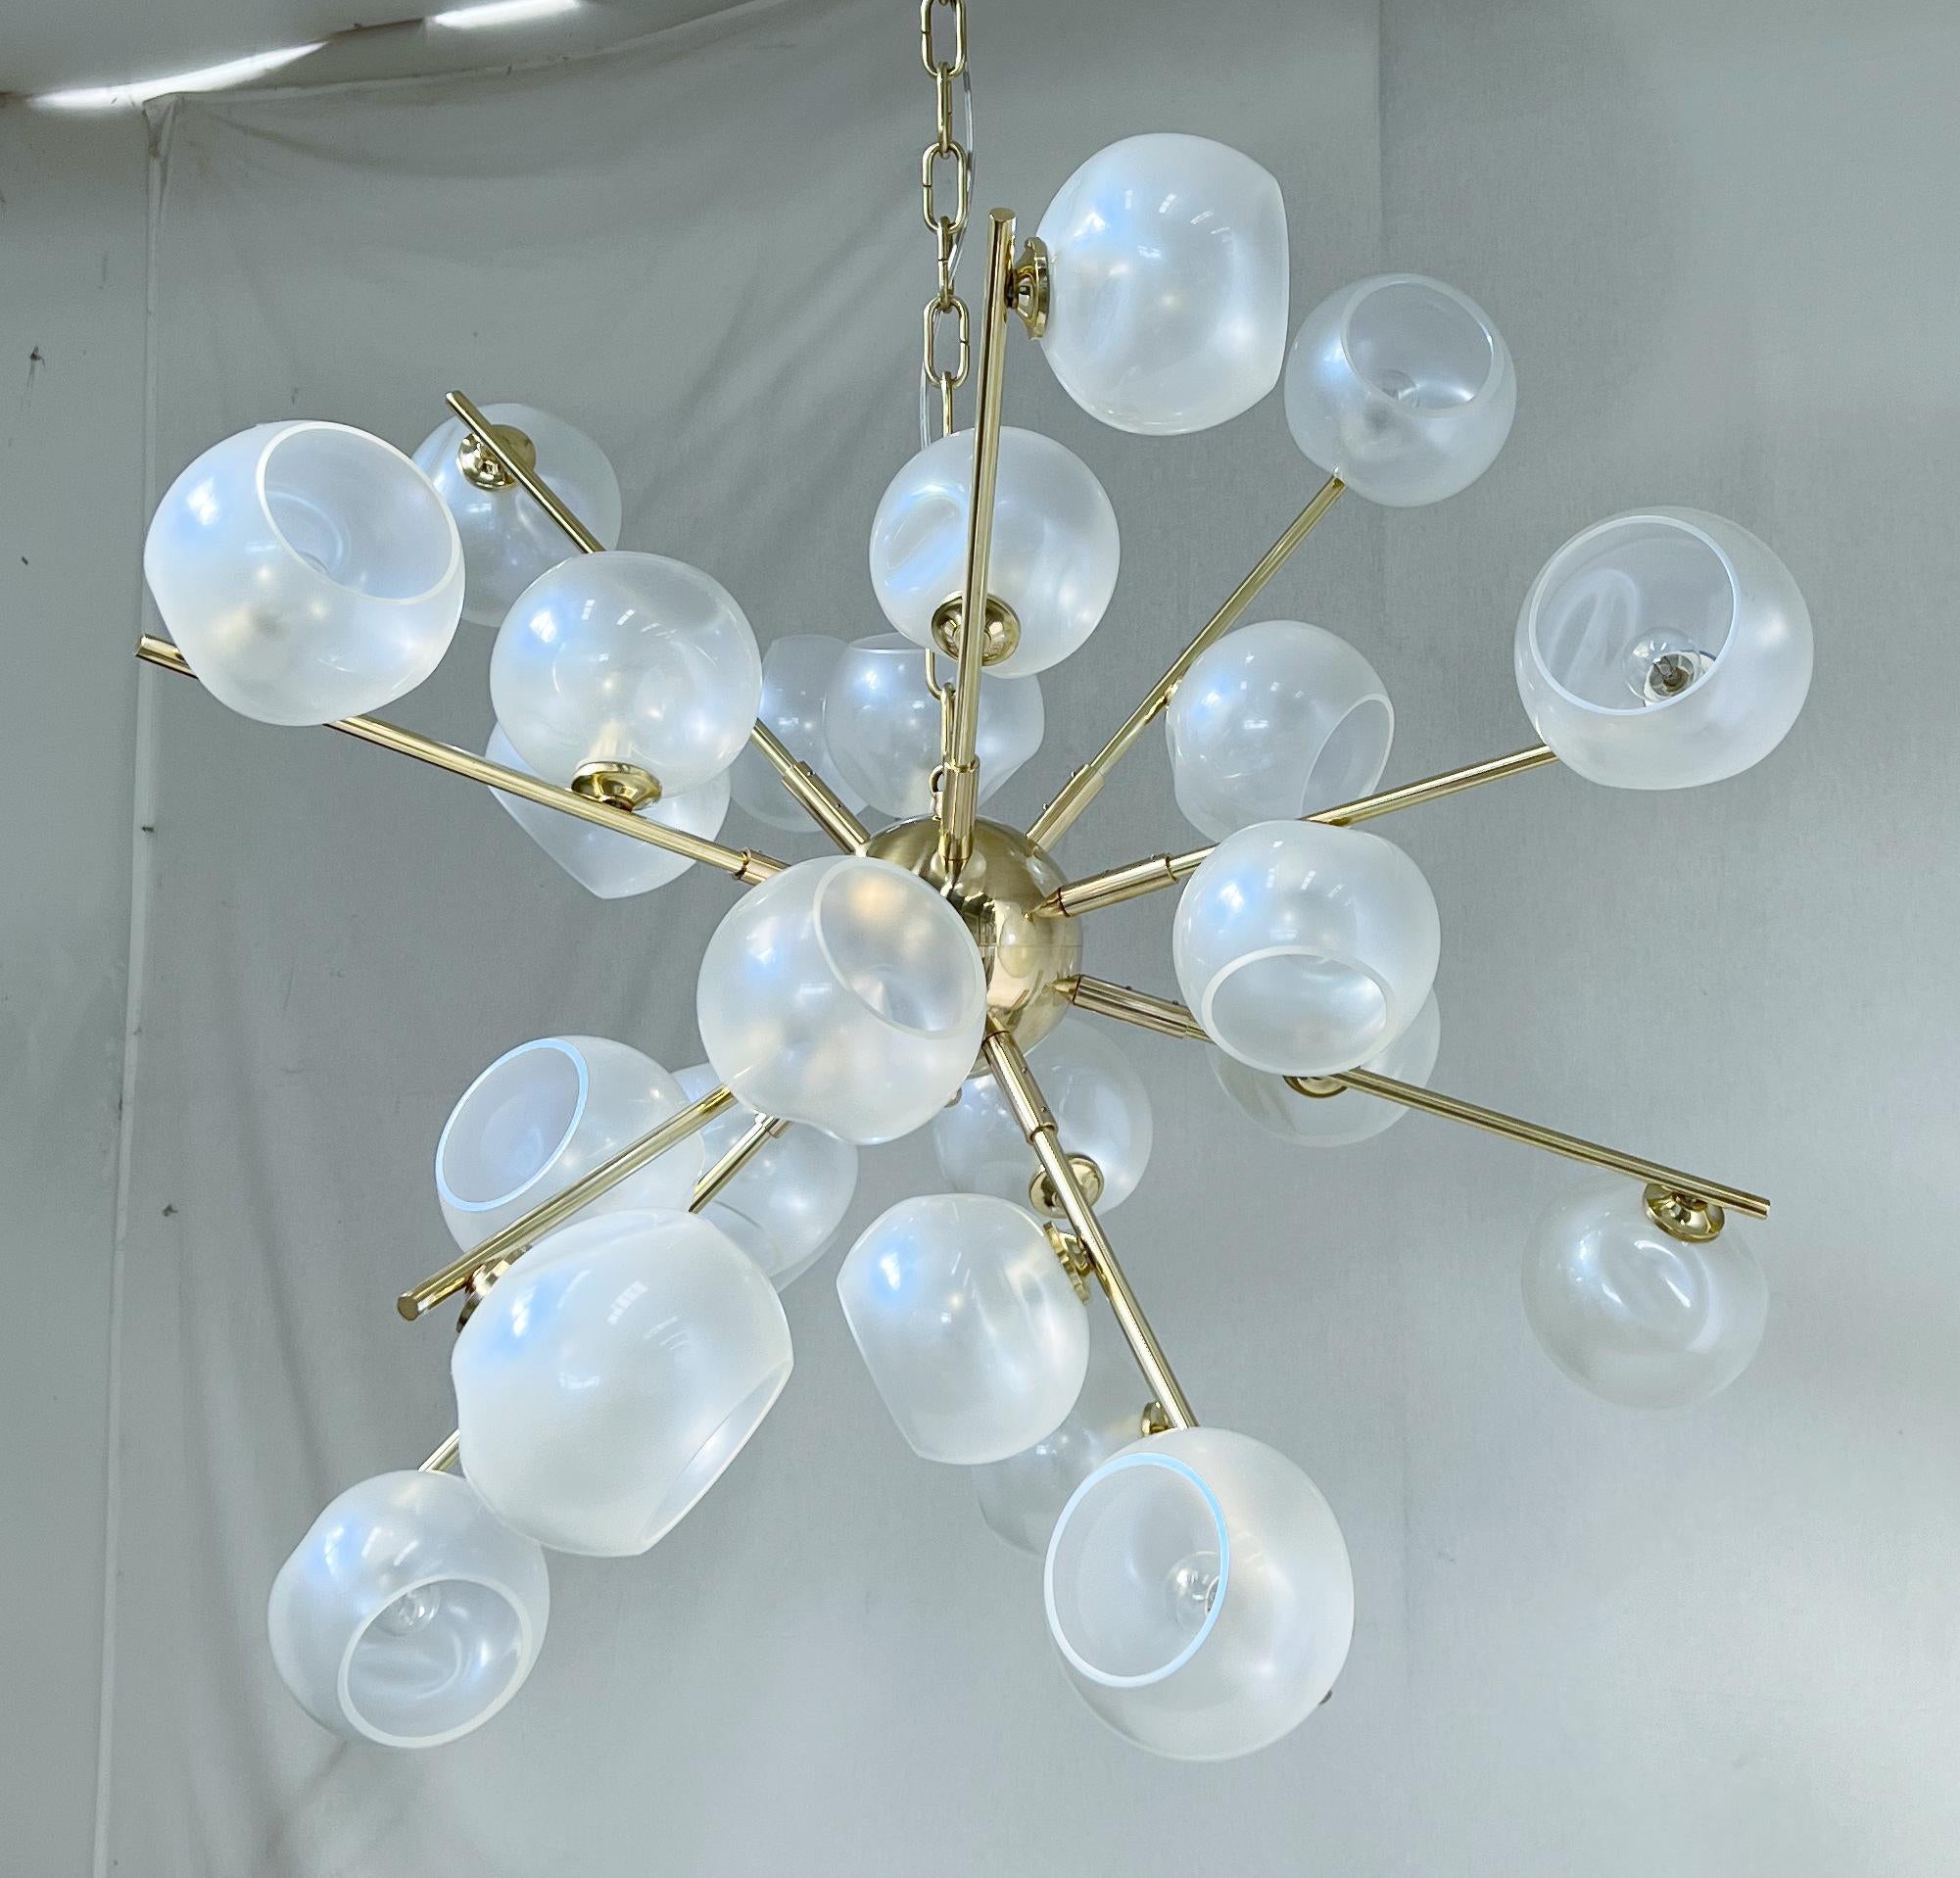 Italian modern sputnik chandelier with opaline Murano glass shades mounted on unlacquered natural brass frame / Made in Italy
24 lights / E12 or E14 type / max 40W each
Measures: Diameter 39 inches / Height 39 inches plus chain and canopy
Order